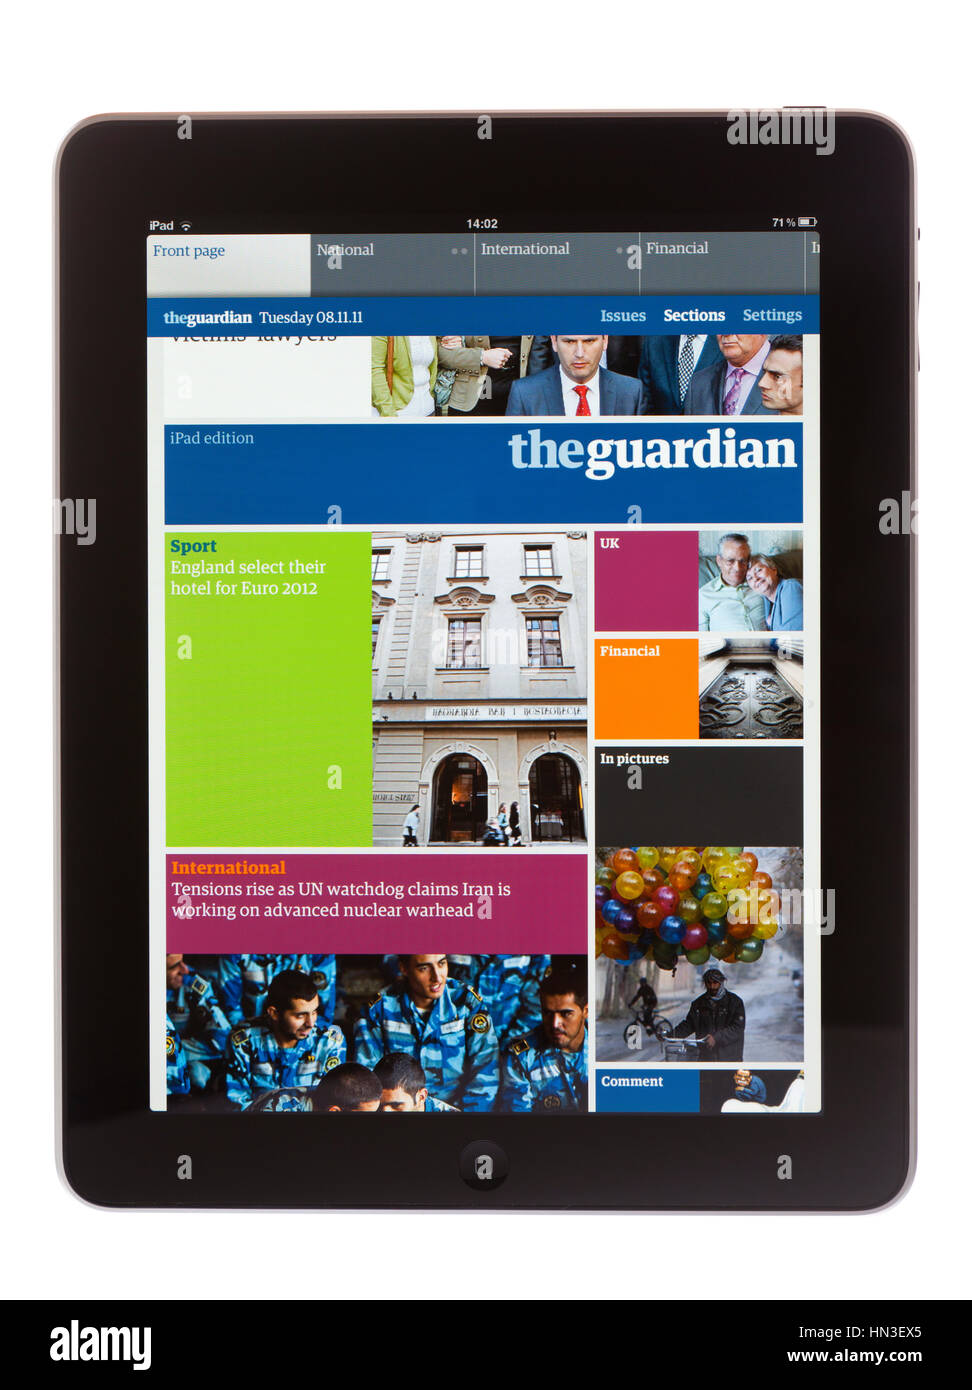 BATH, UK - NOVEMBER 8, 2011: An Apple iPad displaying the iPad edition of the Guardian Newspaper against a white background. The newspaper can be down Stock Photo